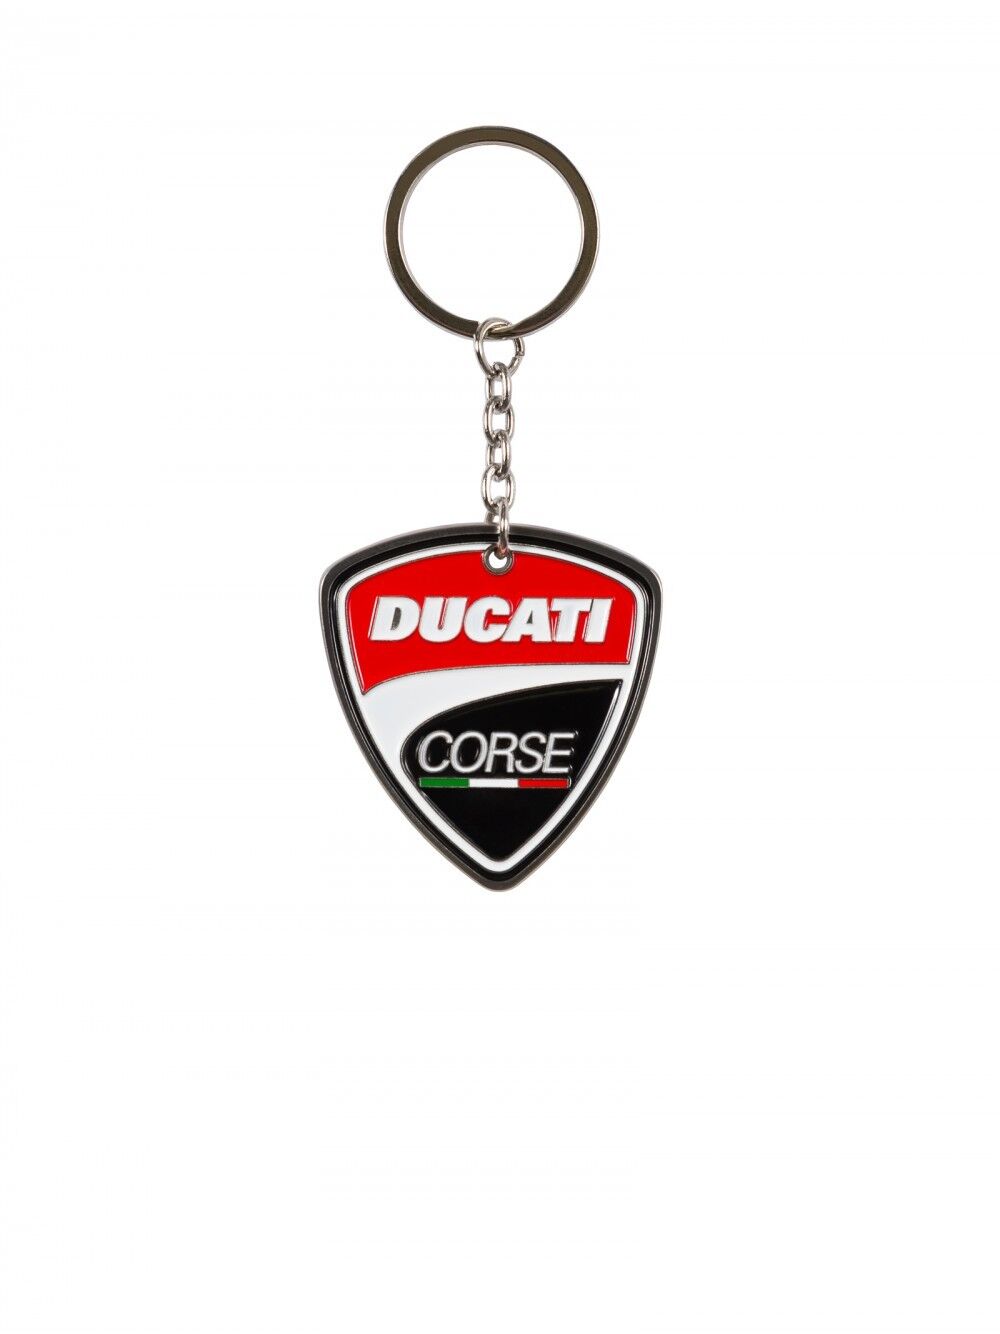 Official Ducati Corse Keyring - 20 56002